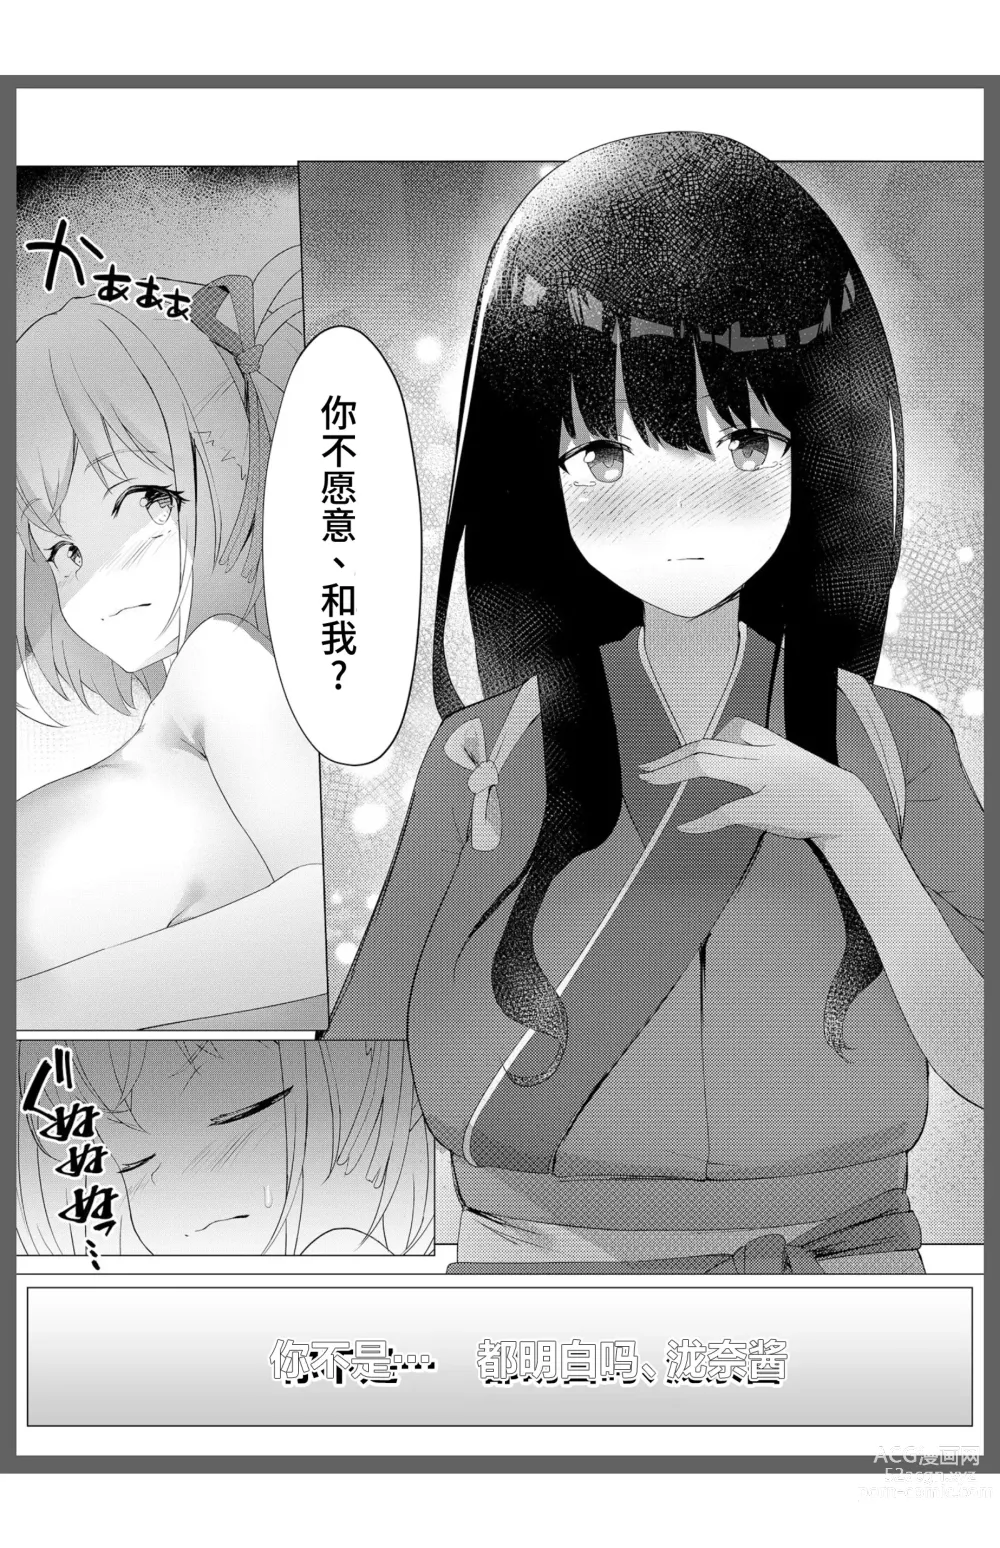 Page 11 of doujinshi 你的心跳 heart beat